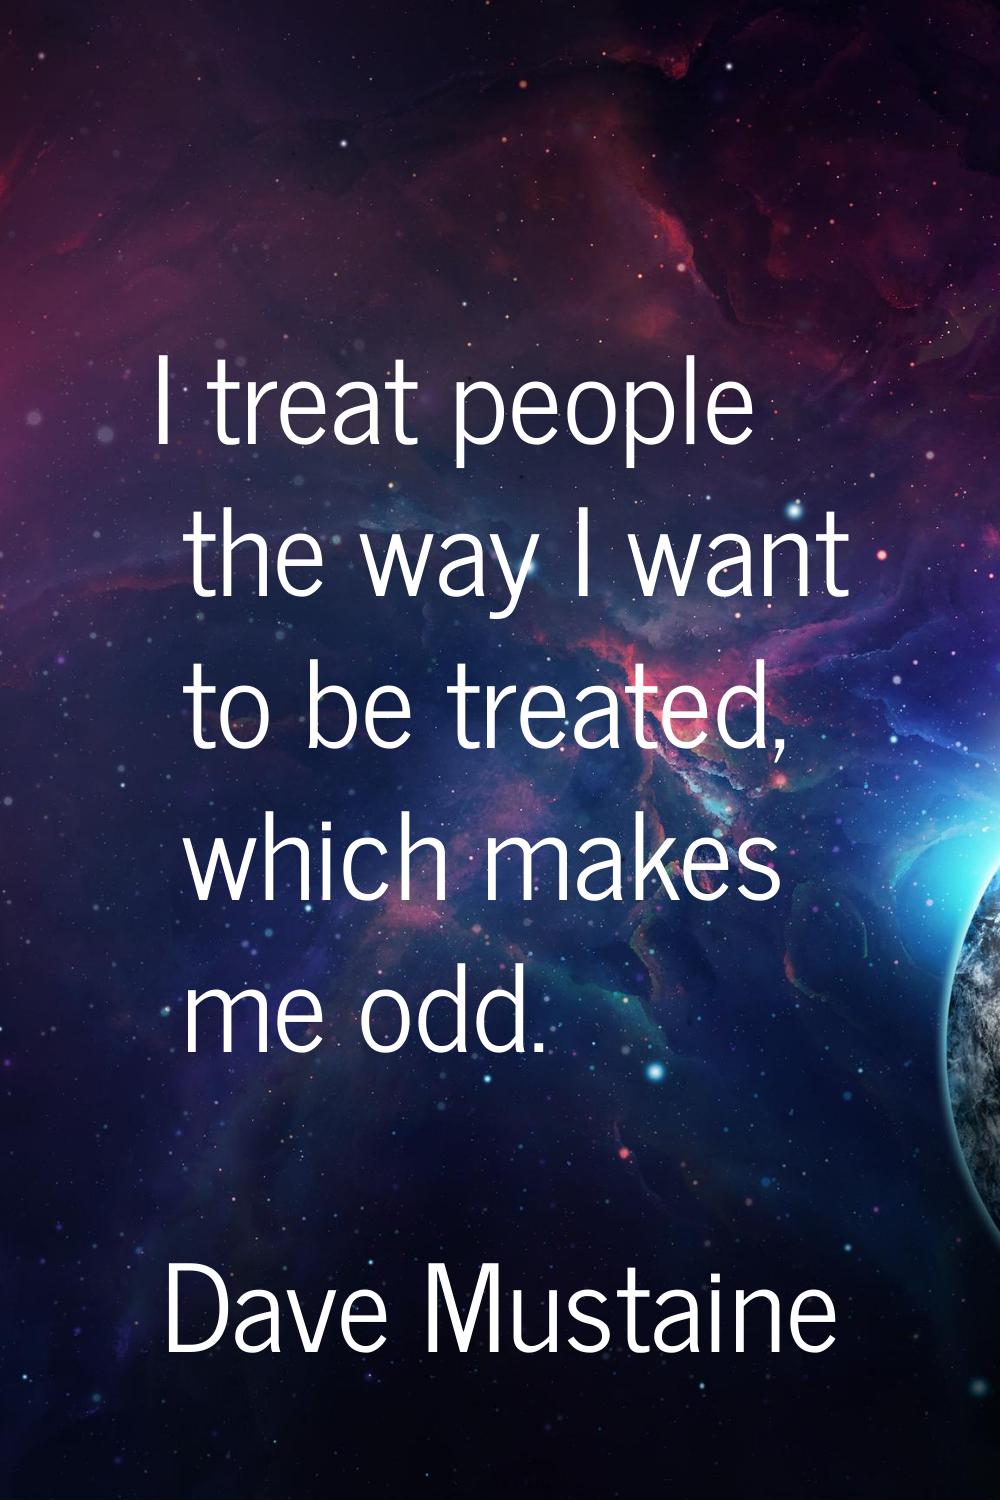 I treat people the way I want to be treated, which makes me odd.